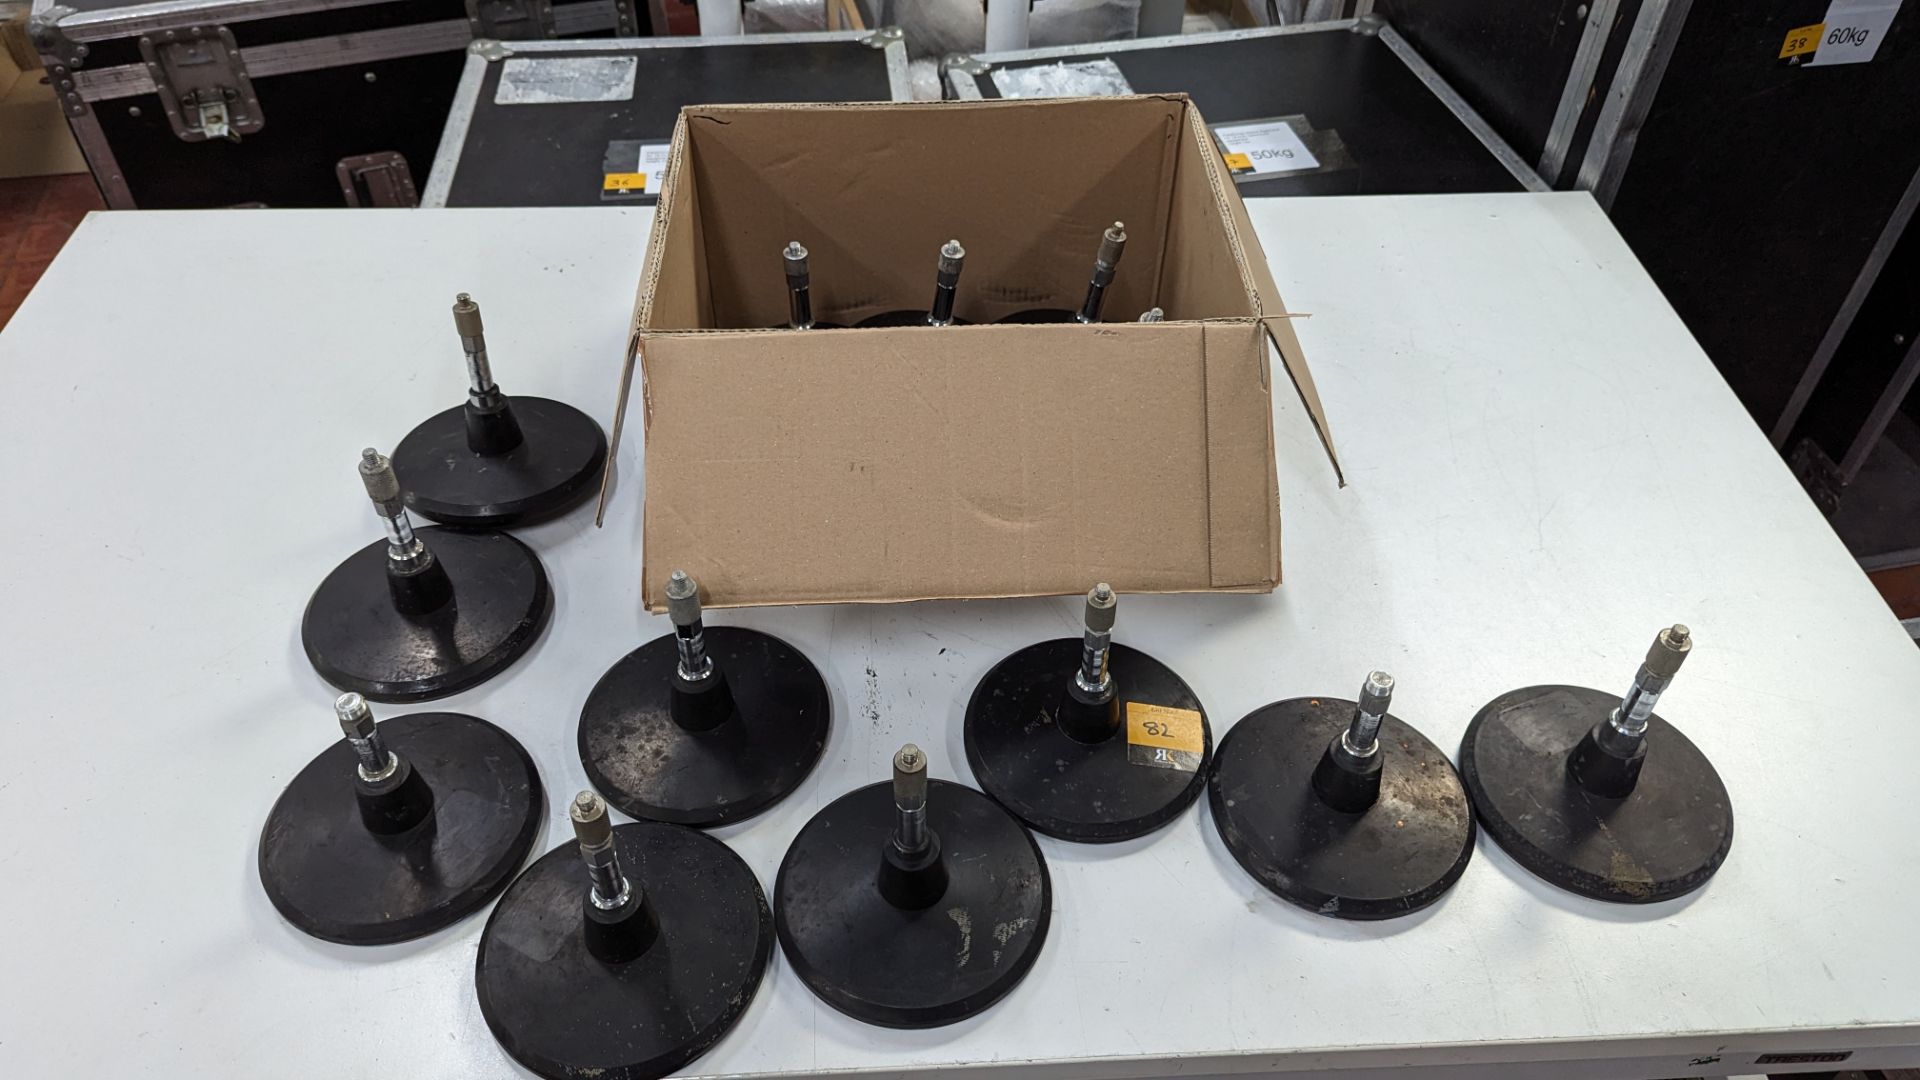 15 off Powerdrive model FS2 table microphone stands. Includes cardboard box. Total lot weight: 15kg - Image 2 of 6